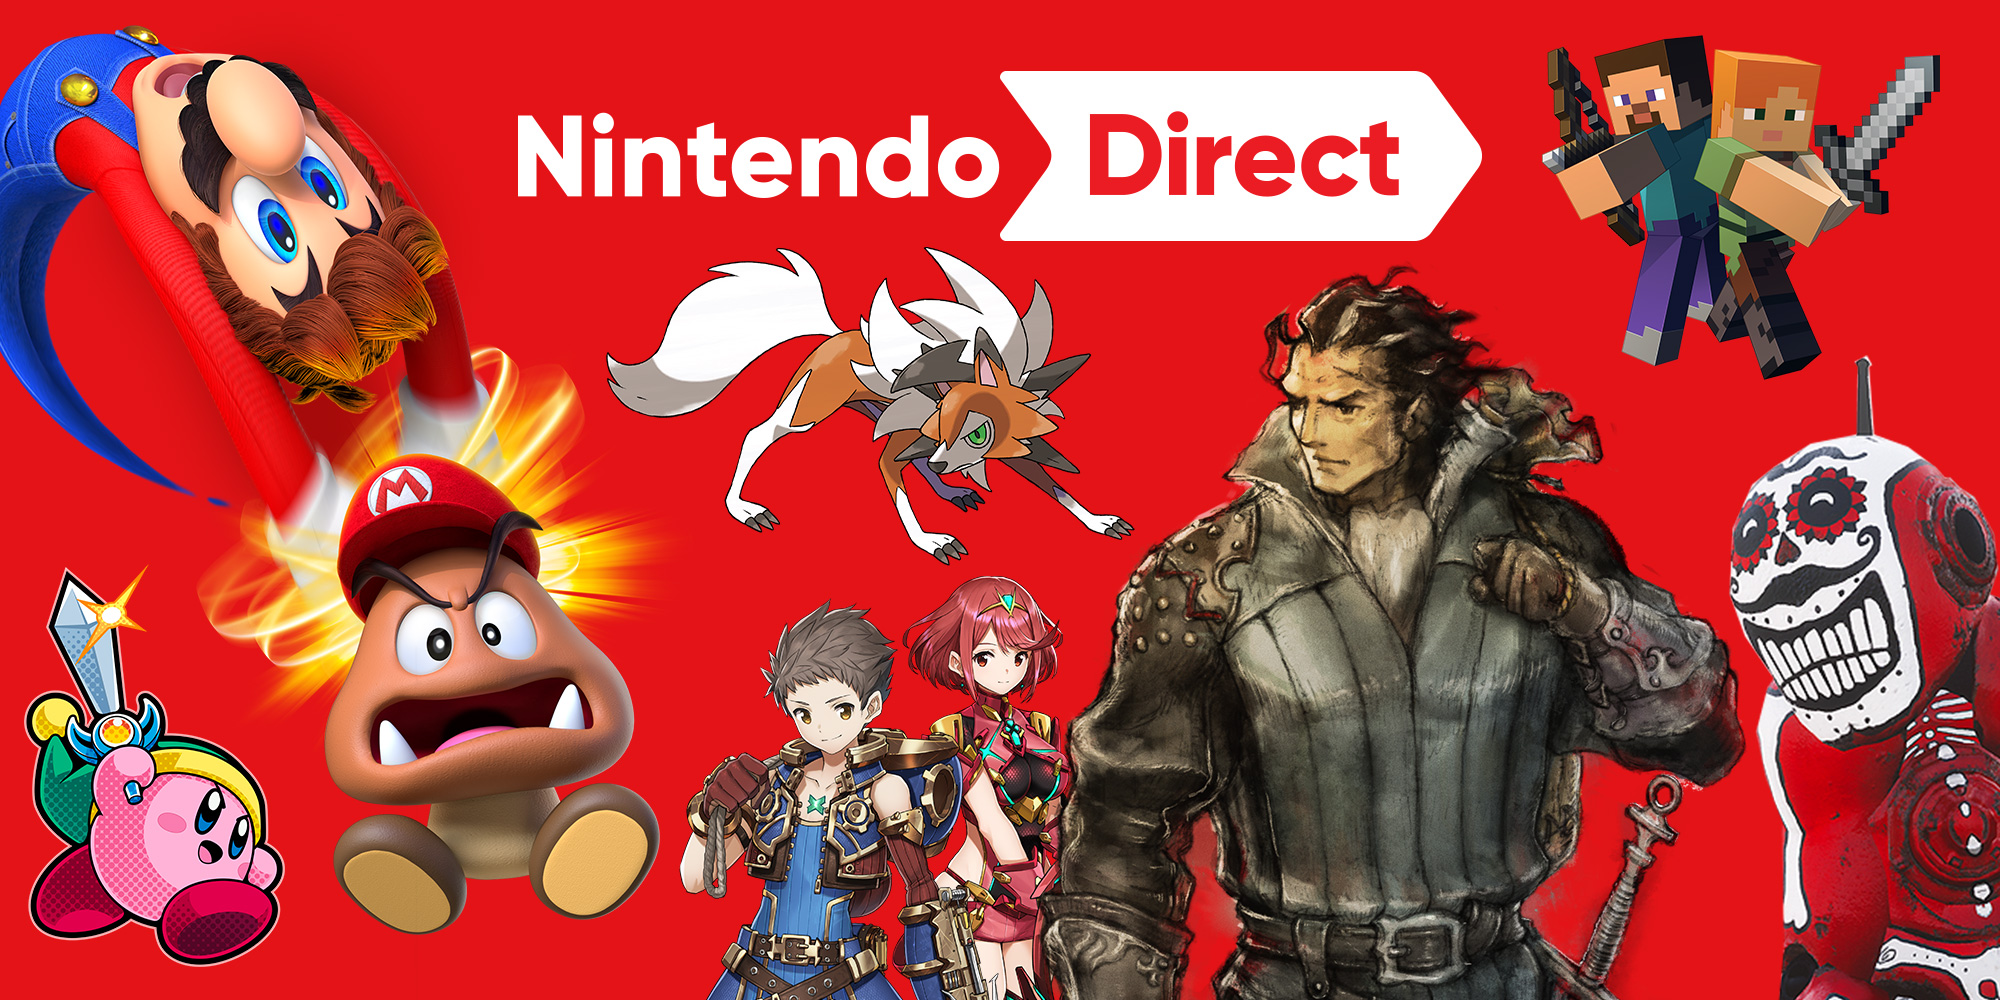 Check Out the Lineup of Switch & 3DS Games From Nintendo Direct 